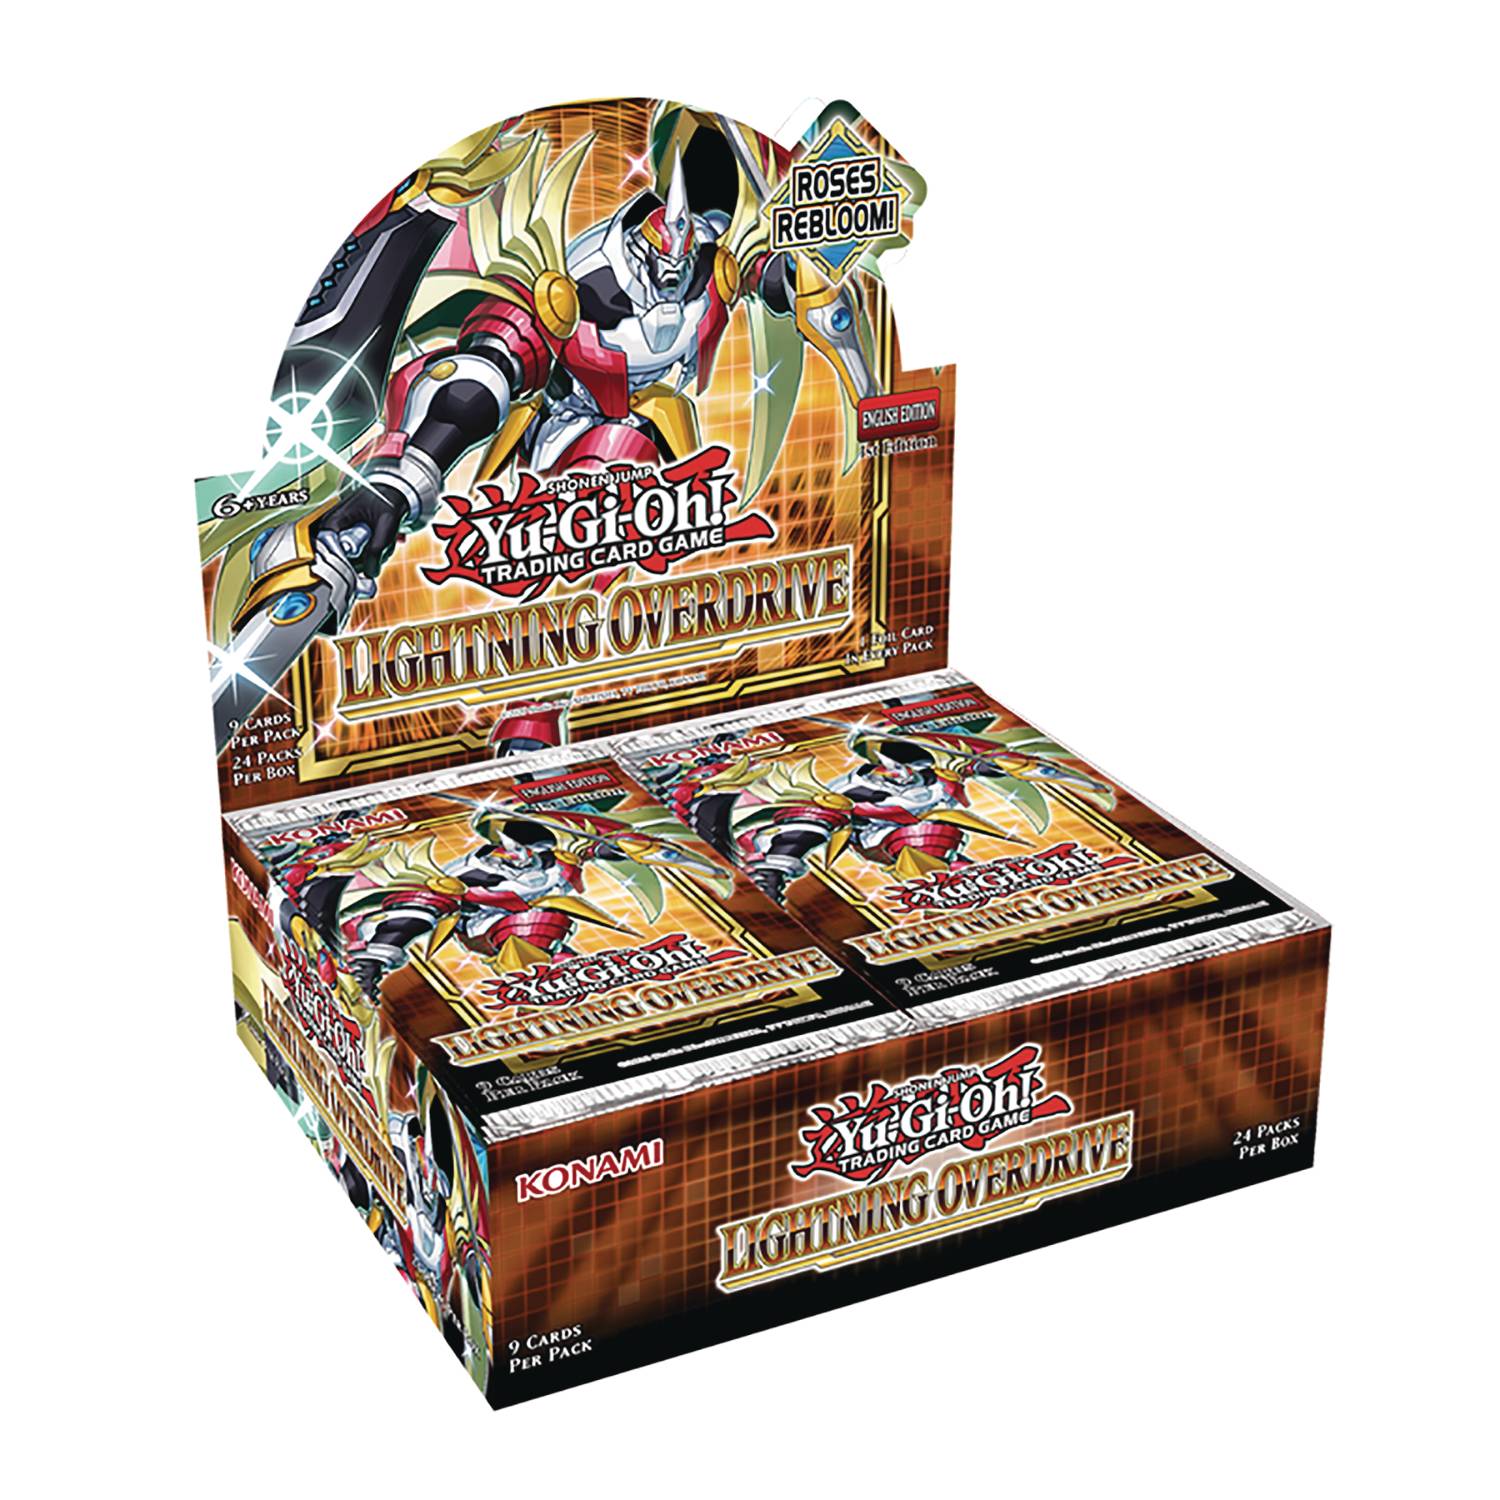 Lightning Overdrive Booster Box [First Edition] | Black Swamp Games